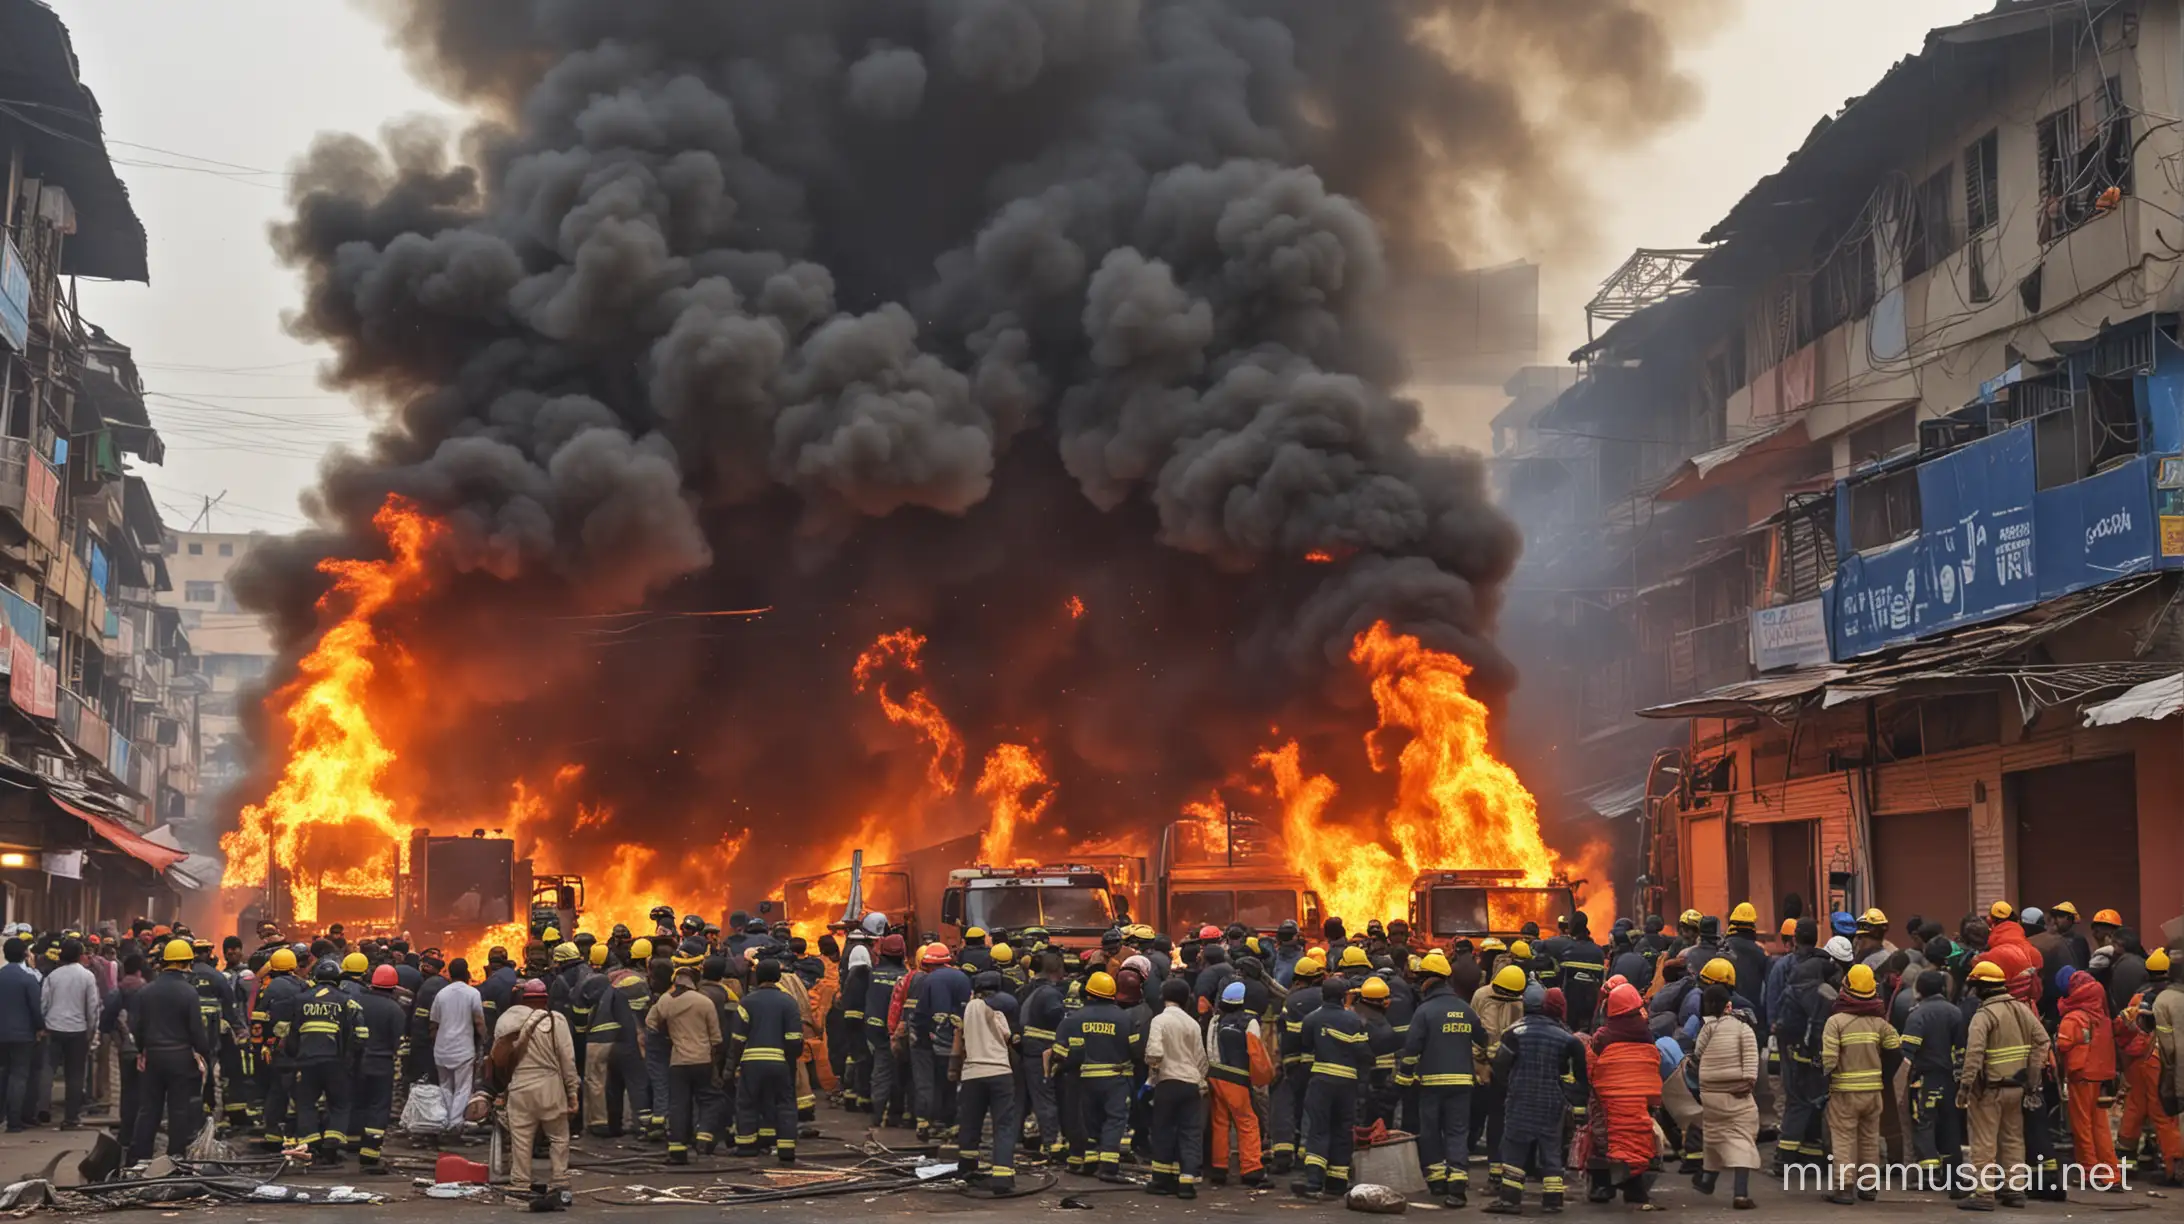 Indian Market Fire Emergency Response in a Crowded Locale